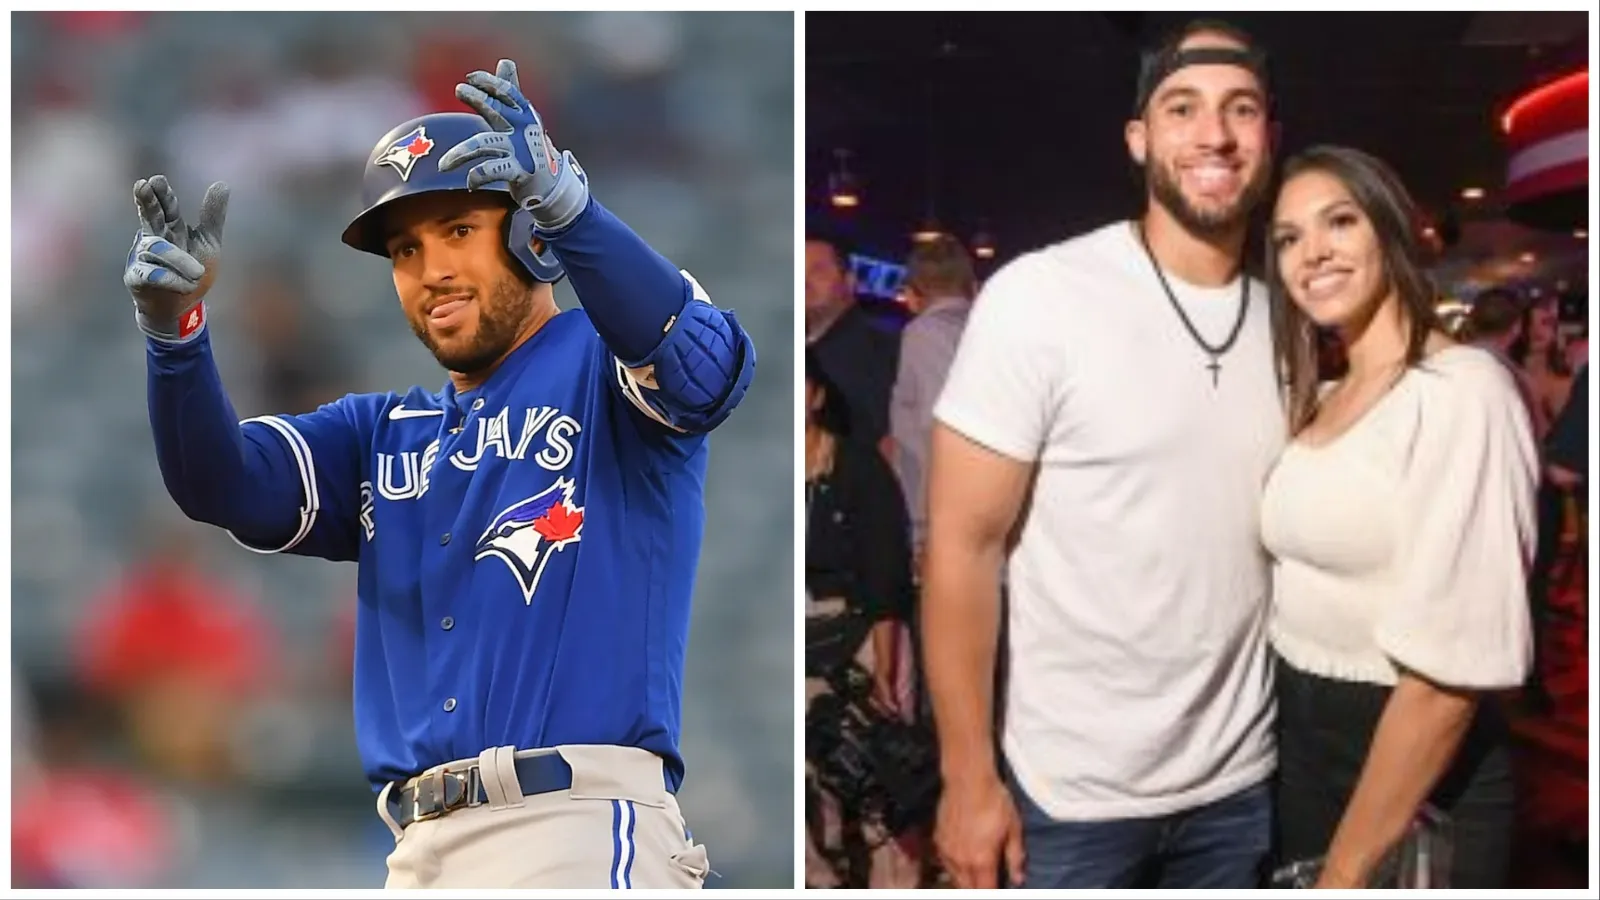 Charlise Castro's biography and all the details about George Springer's wife